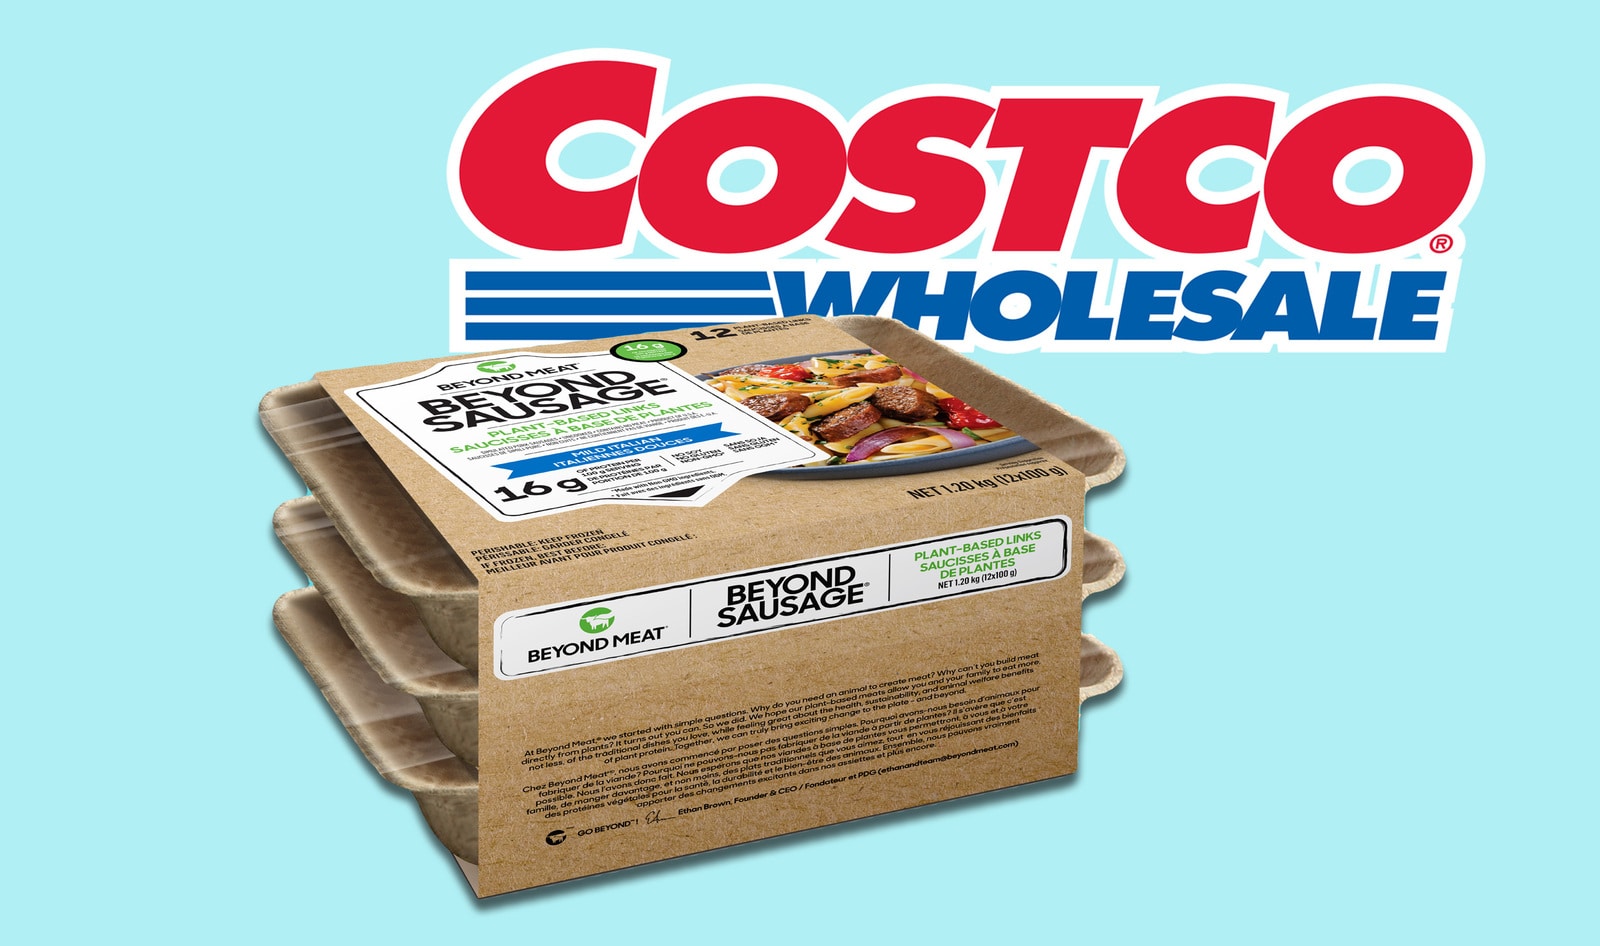 Costco Canada Is Now Selling Beyond Sausages for $1.67 Each&nbsp;